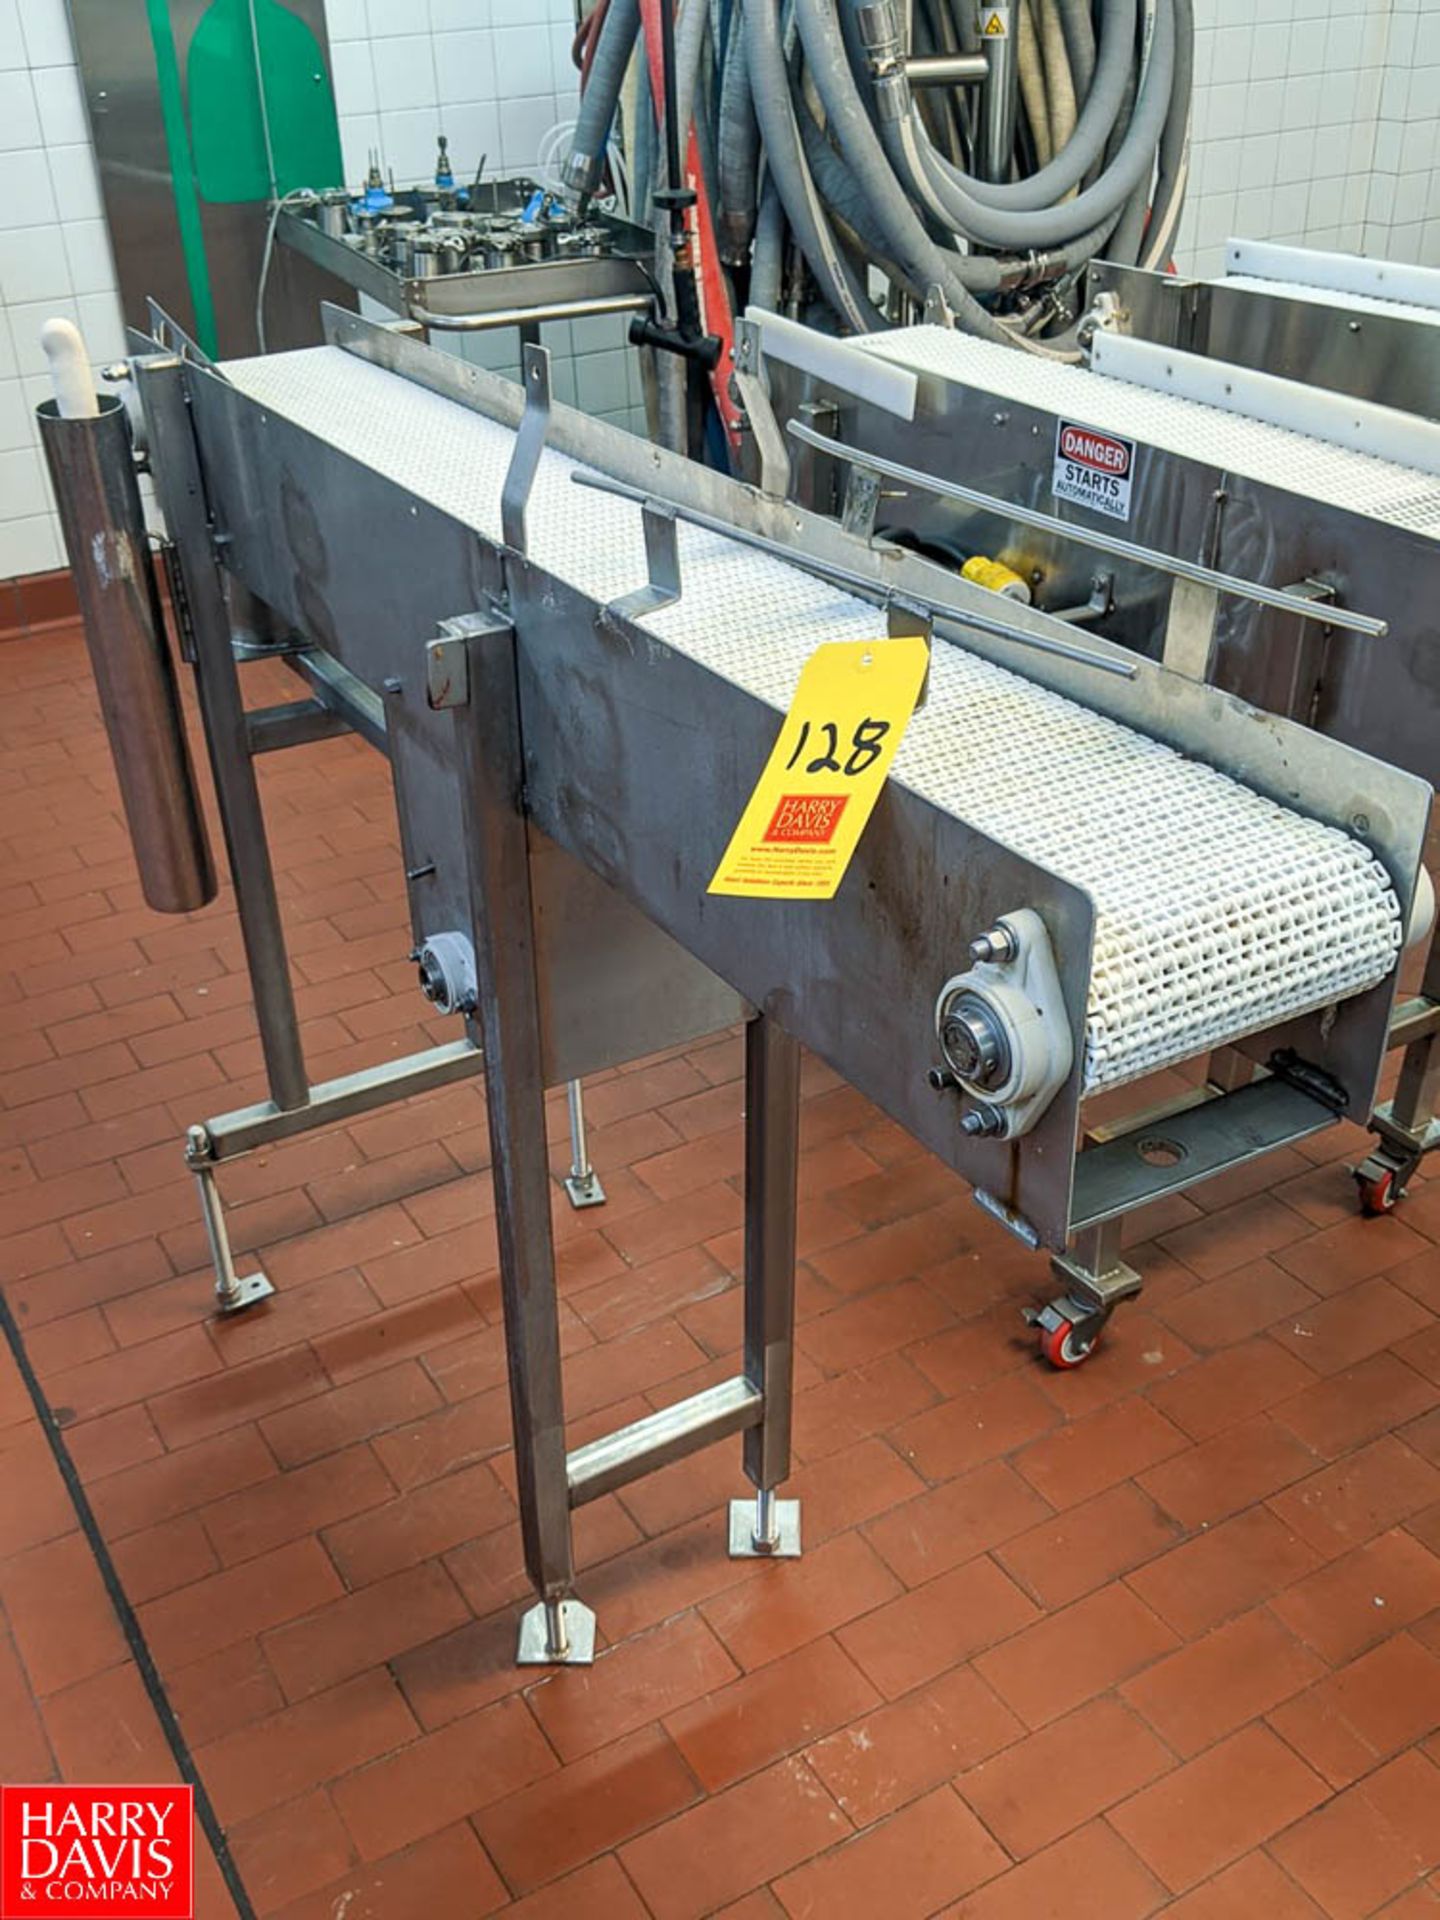 5'L Powered S/S Conveyor with 8" Sanitary Belting Rigging Fee: $150